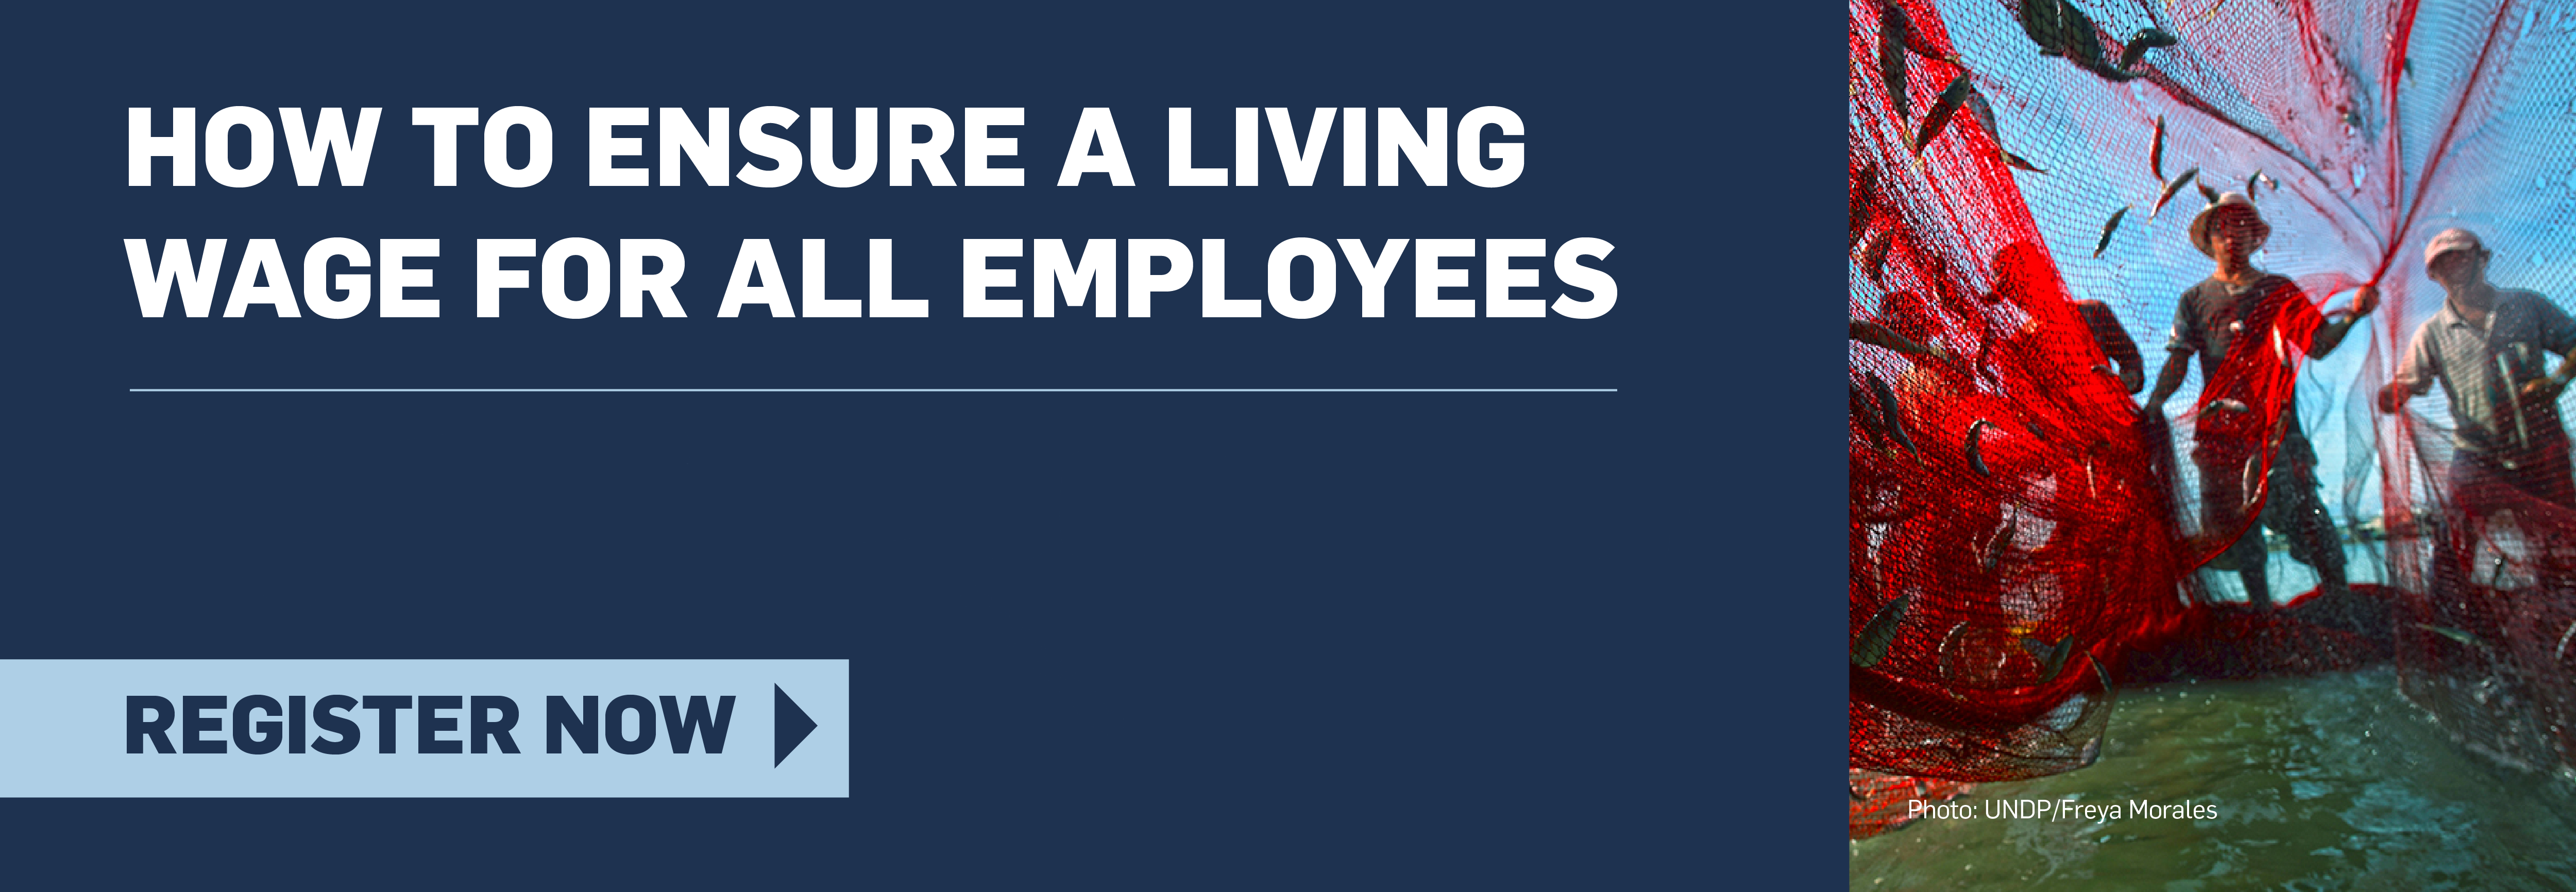 How to Ensure a Living Wage for All Employees